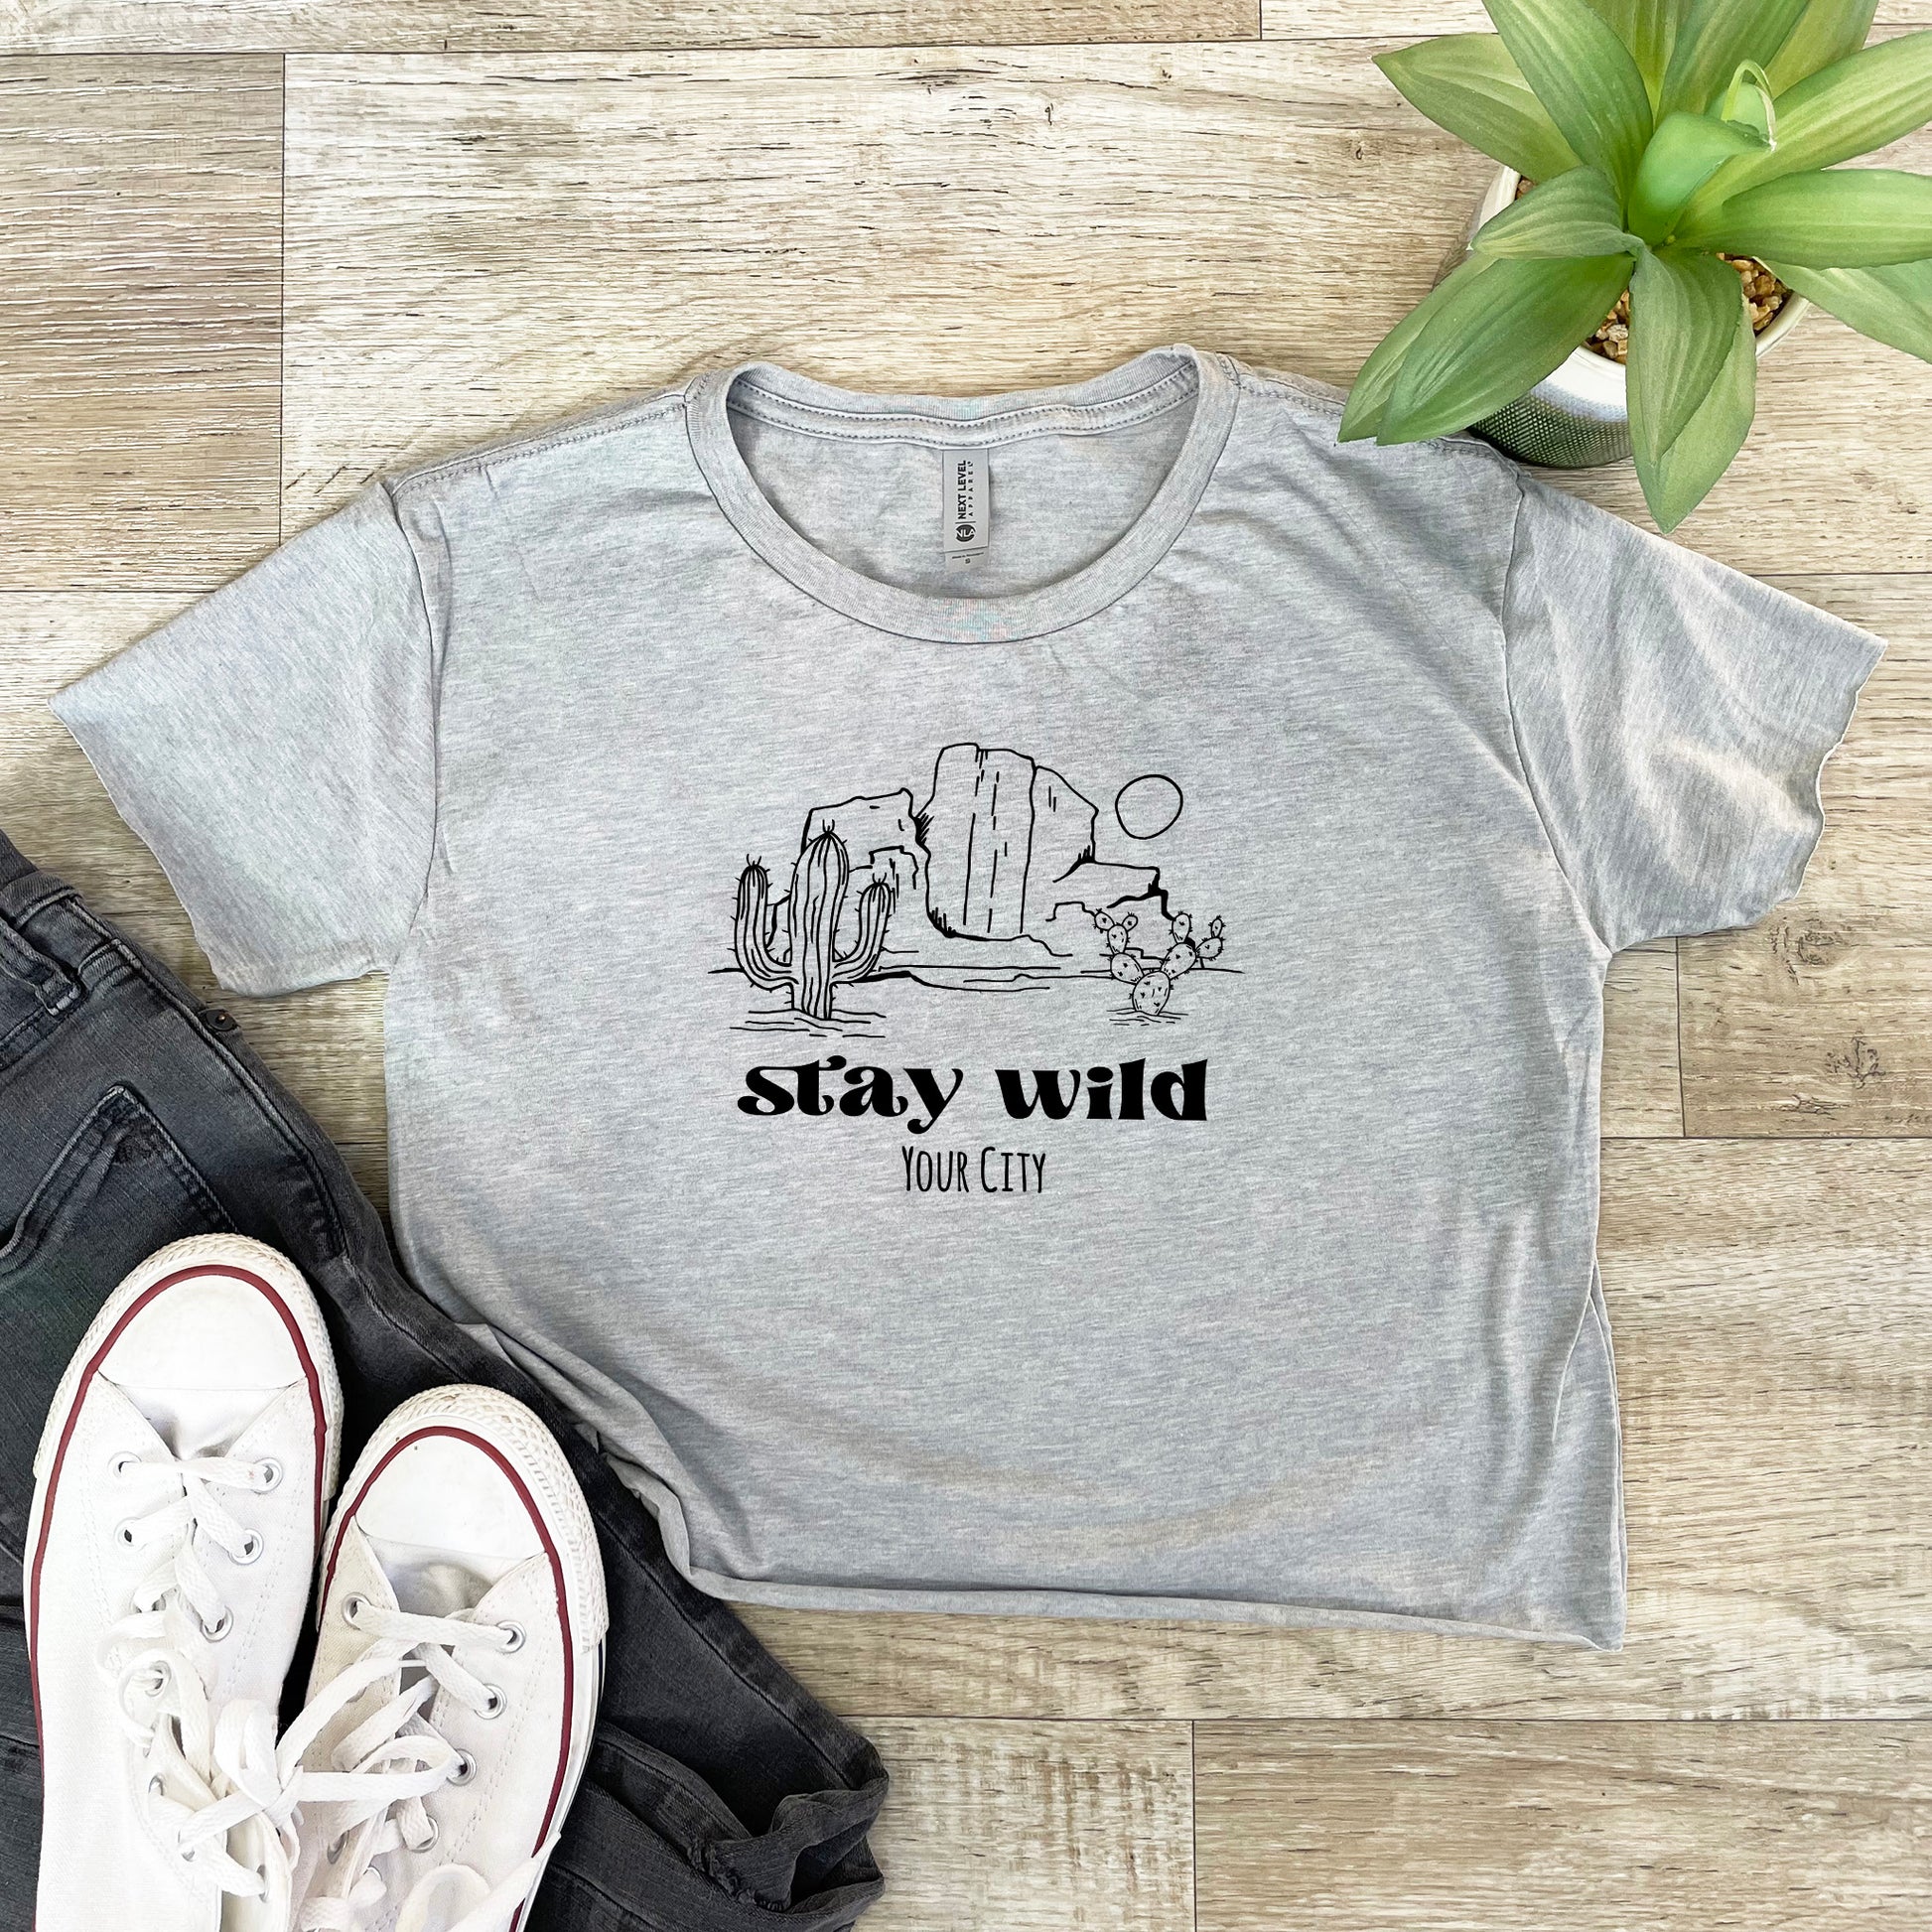 a t - shirt that says stay wild and a pair of sneakers